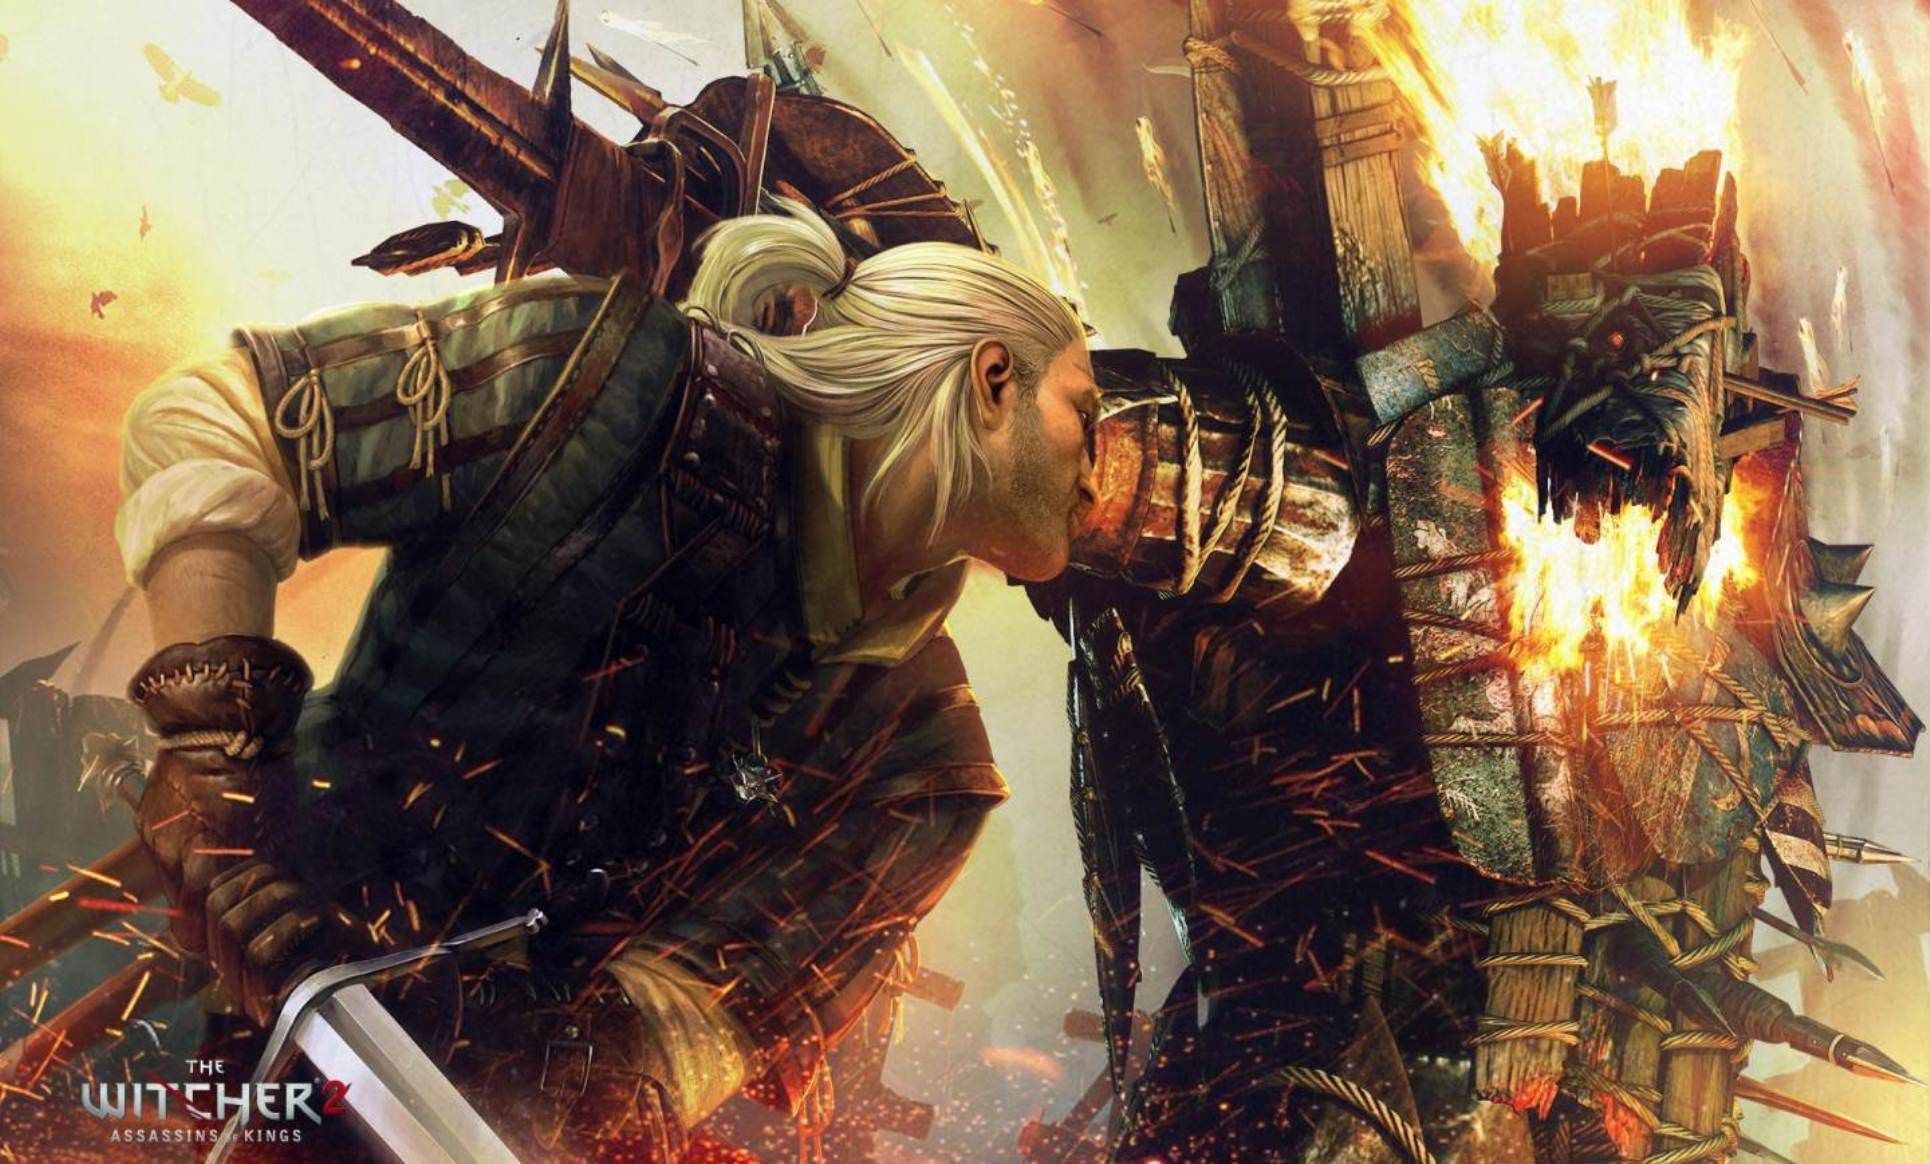 The Witcher 2 Assassins of Kings Wallpaper HD Wallpaper. The witcher, Witcher art, Witcher 2